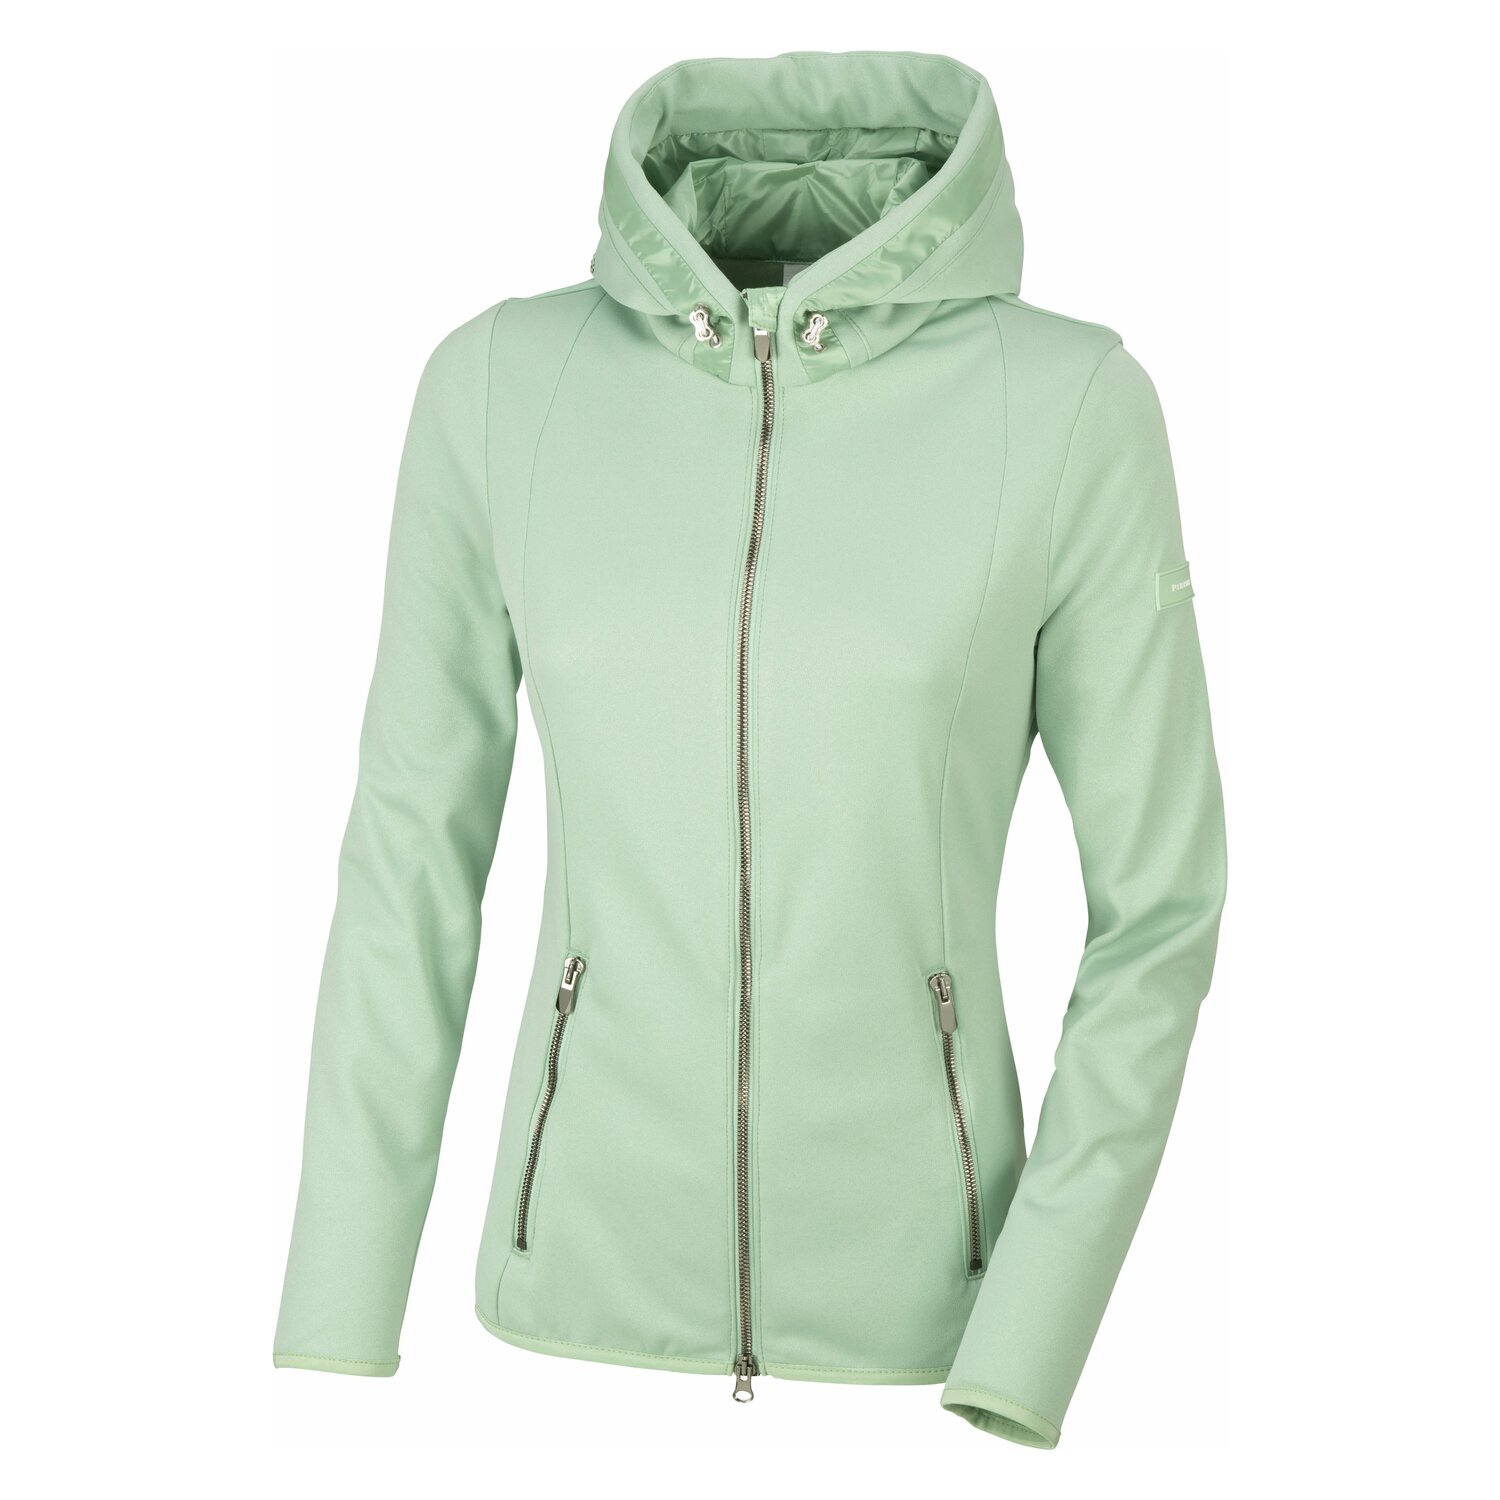 PIKEUR Sommer-Fleecejacke Monja Sports Collection 